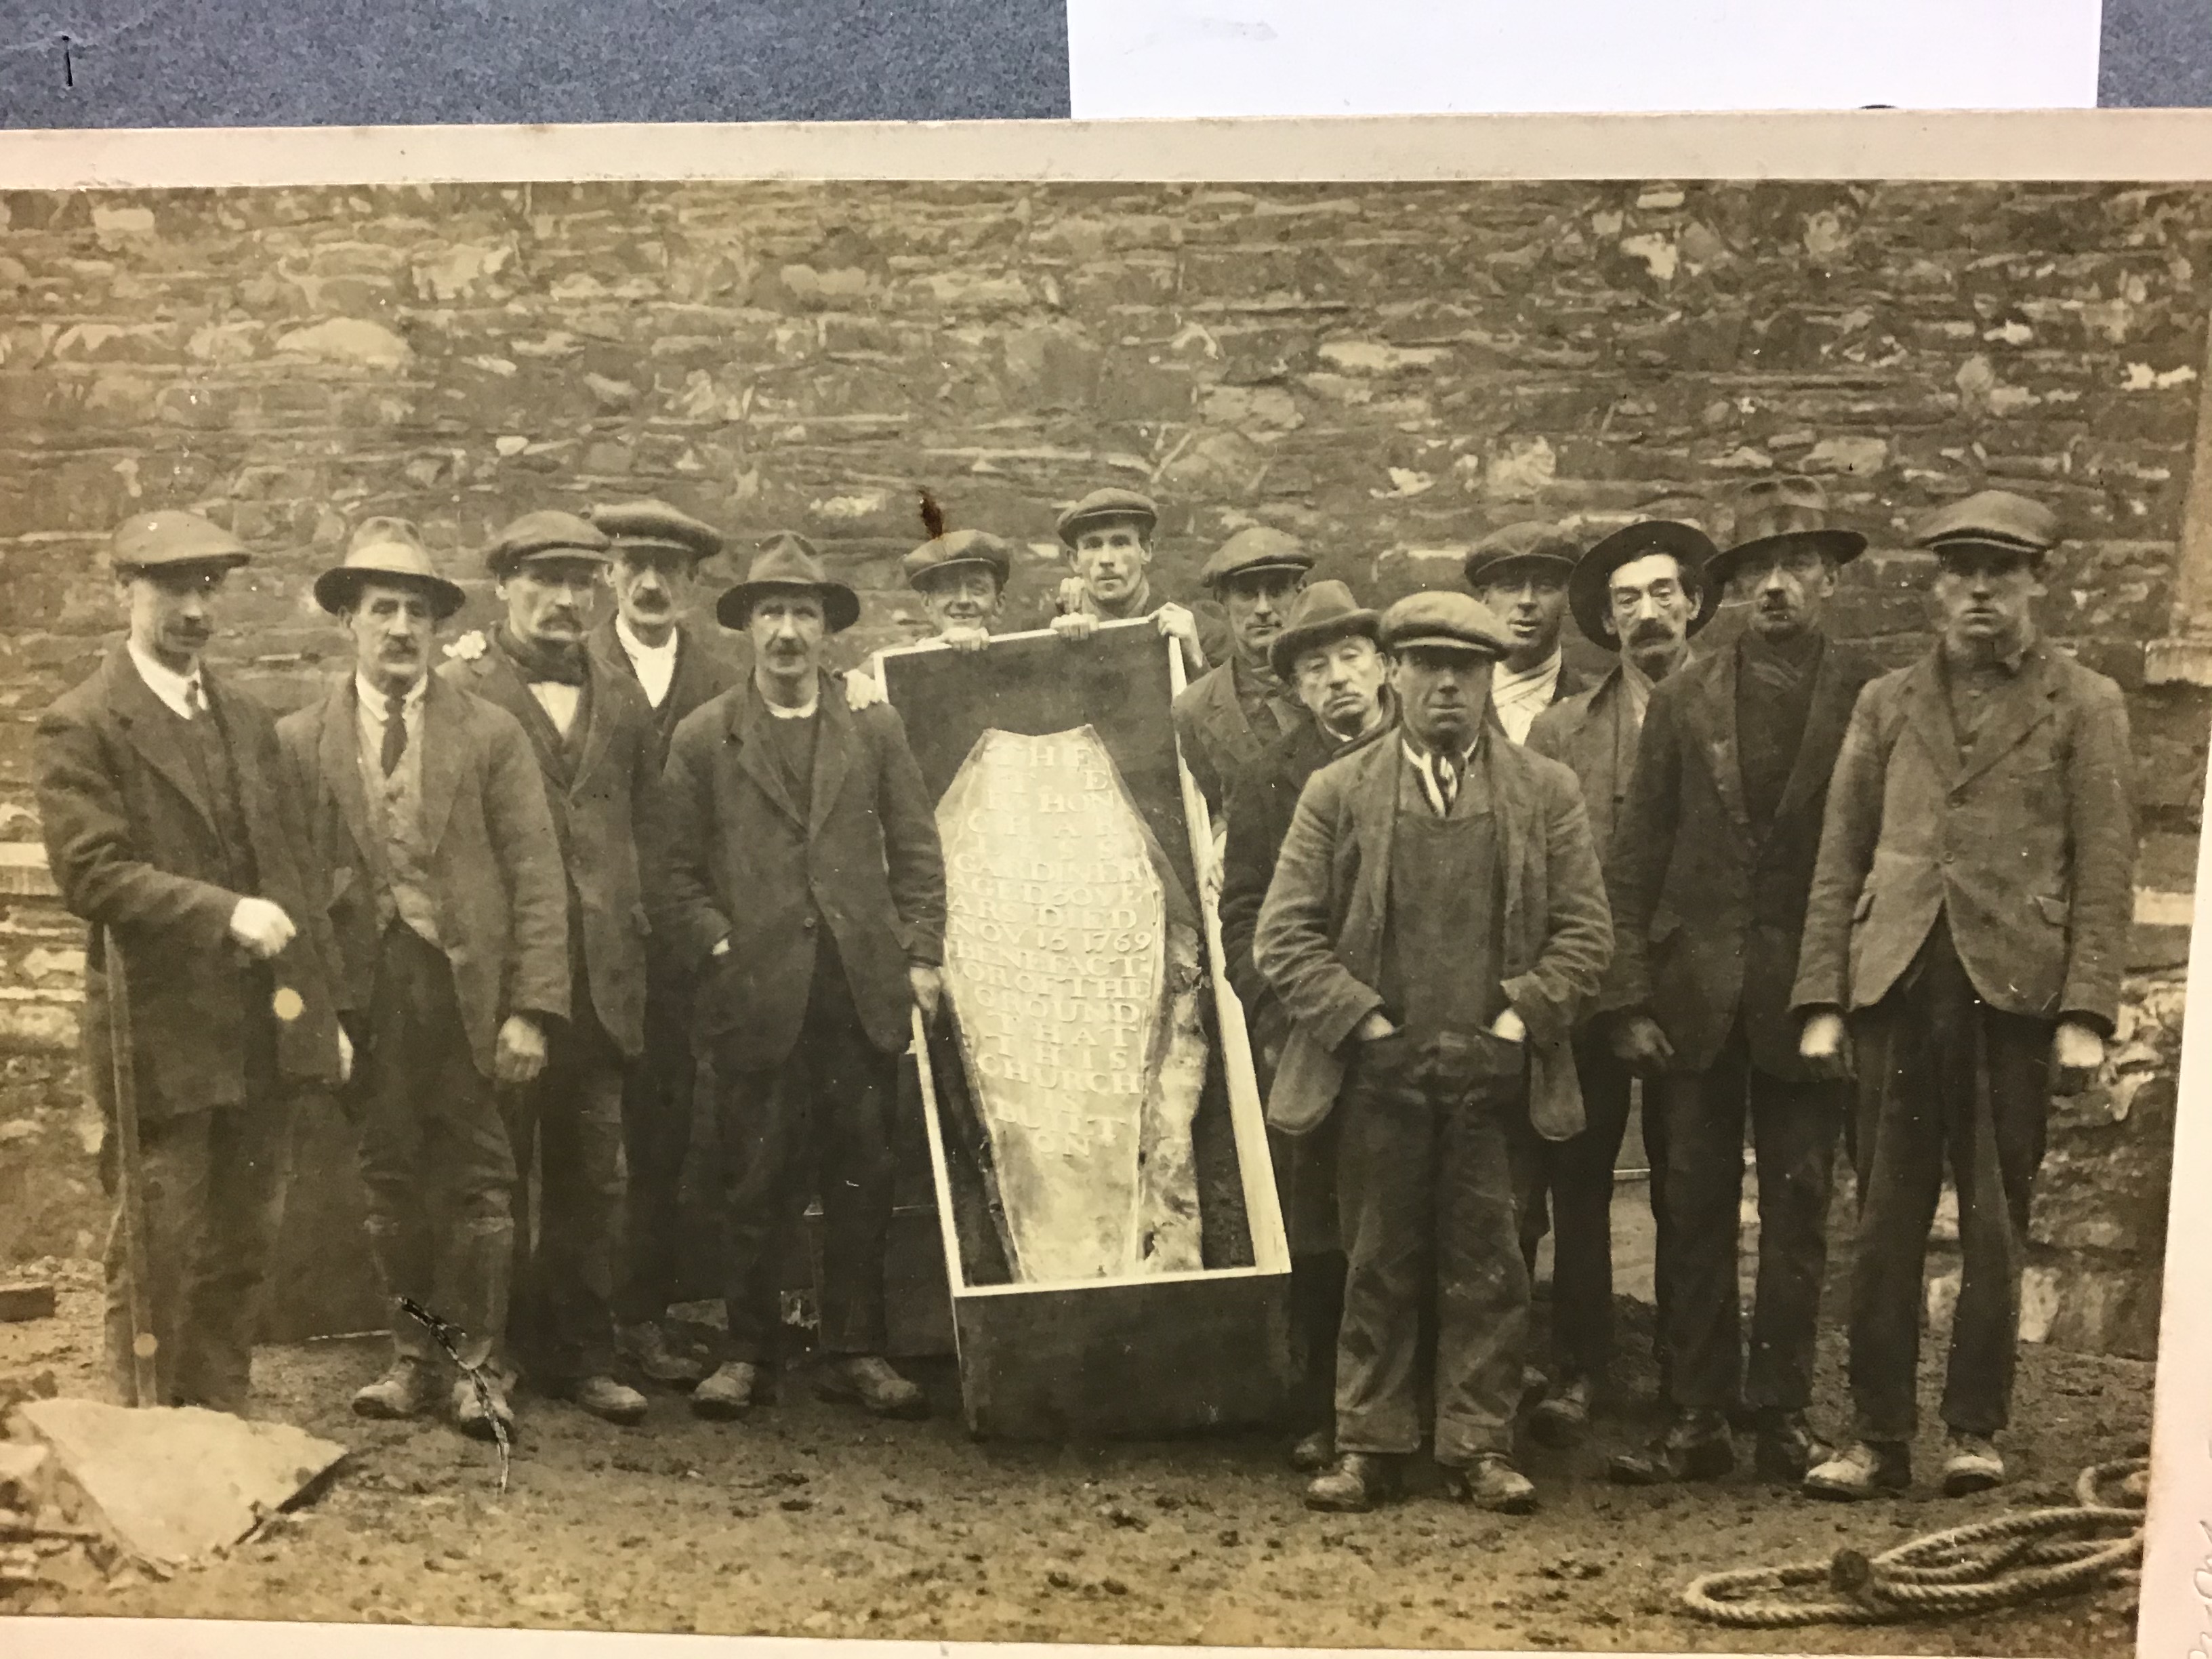 Another photograph of the tombstone of the Rt Hon Charles Gardiner, presumably showing some of the workmen employed for the task, as well as the ever-present Mr Purdon. RCB Library P.80.27.6